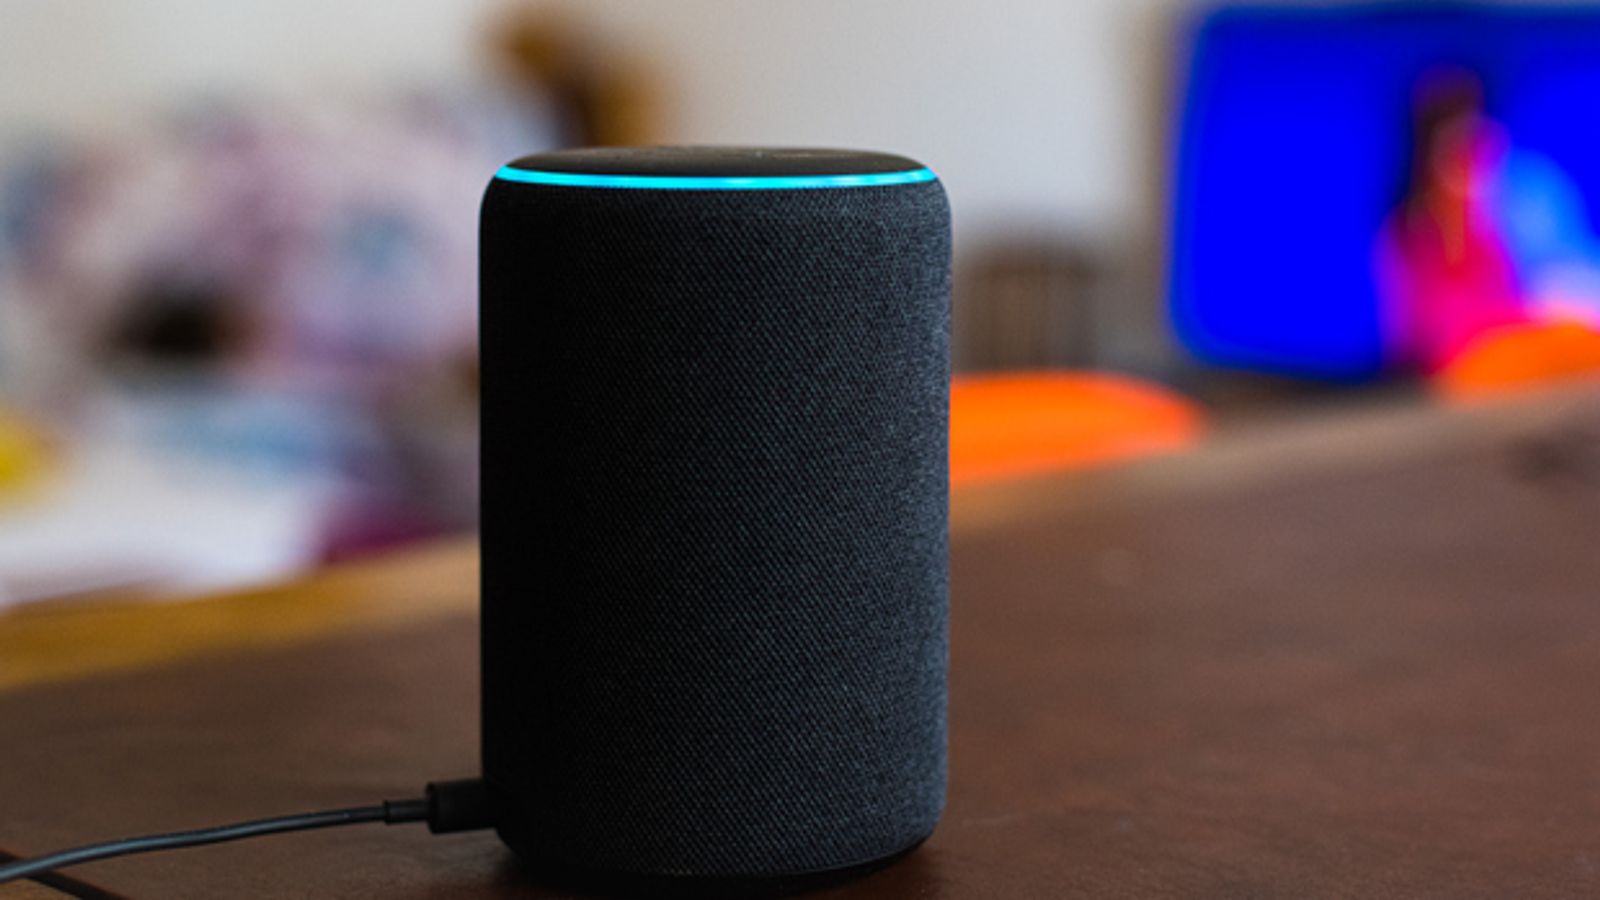 Amazon's Alexa 'fixed' after it tells 10-year-old girl to touch plug socket with penny